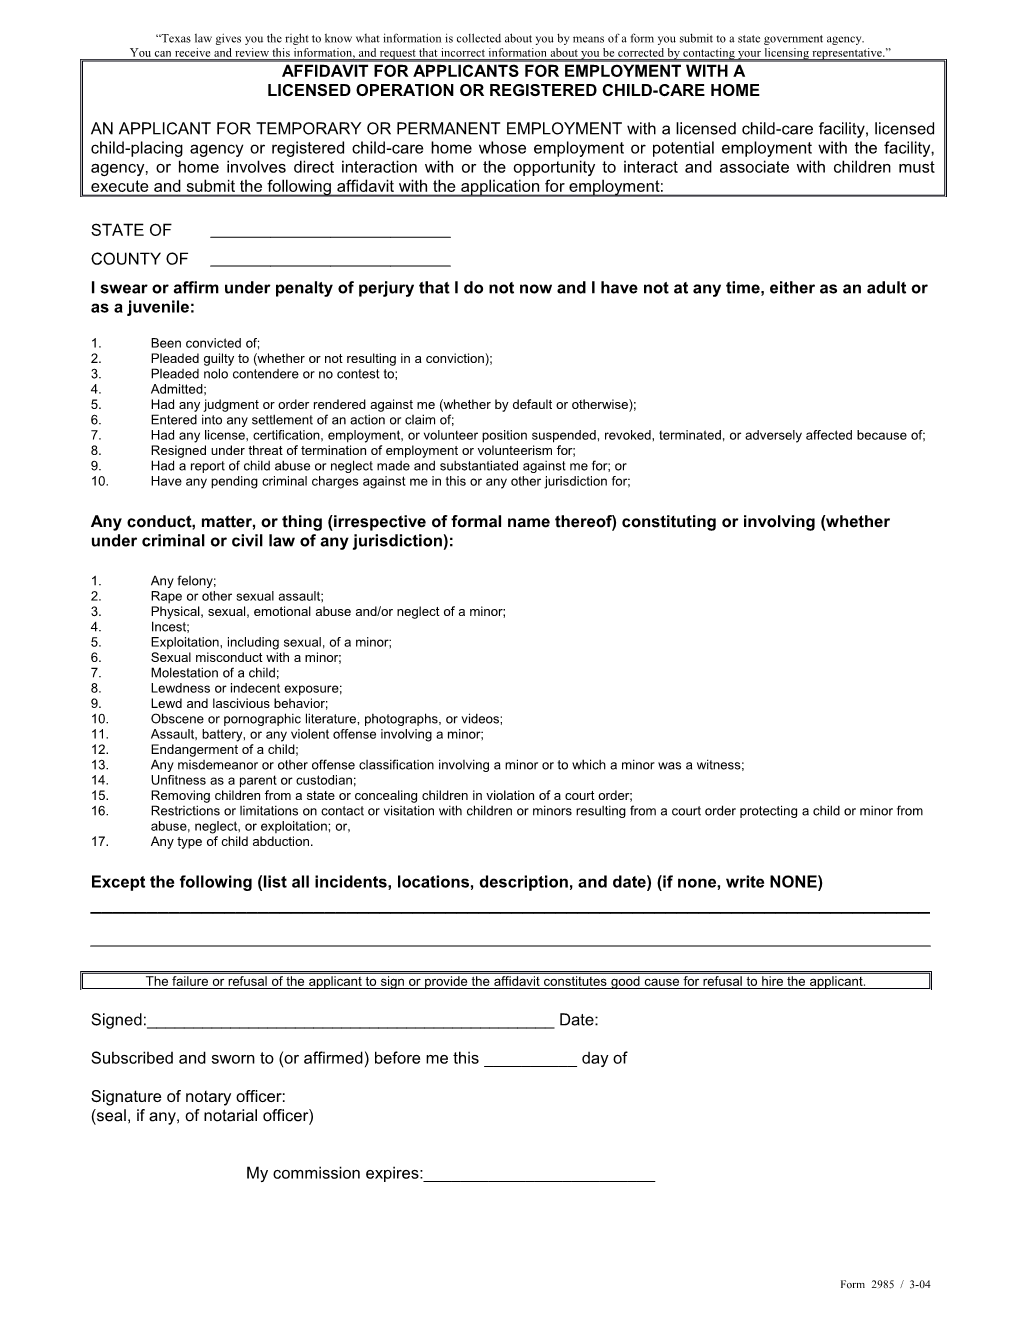 Affidavit for Application for Employment with a CCF Or RFH